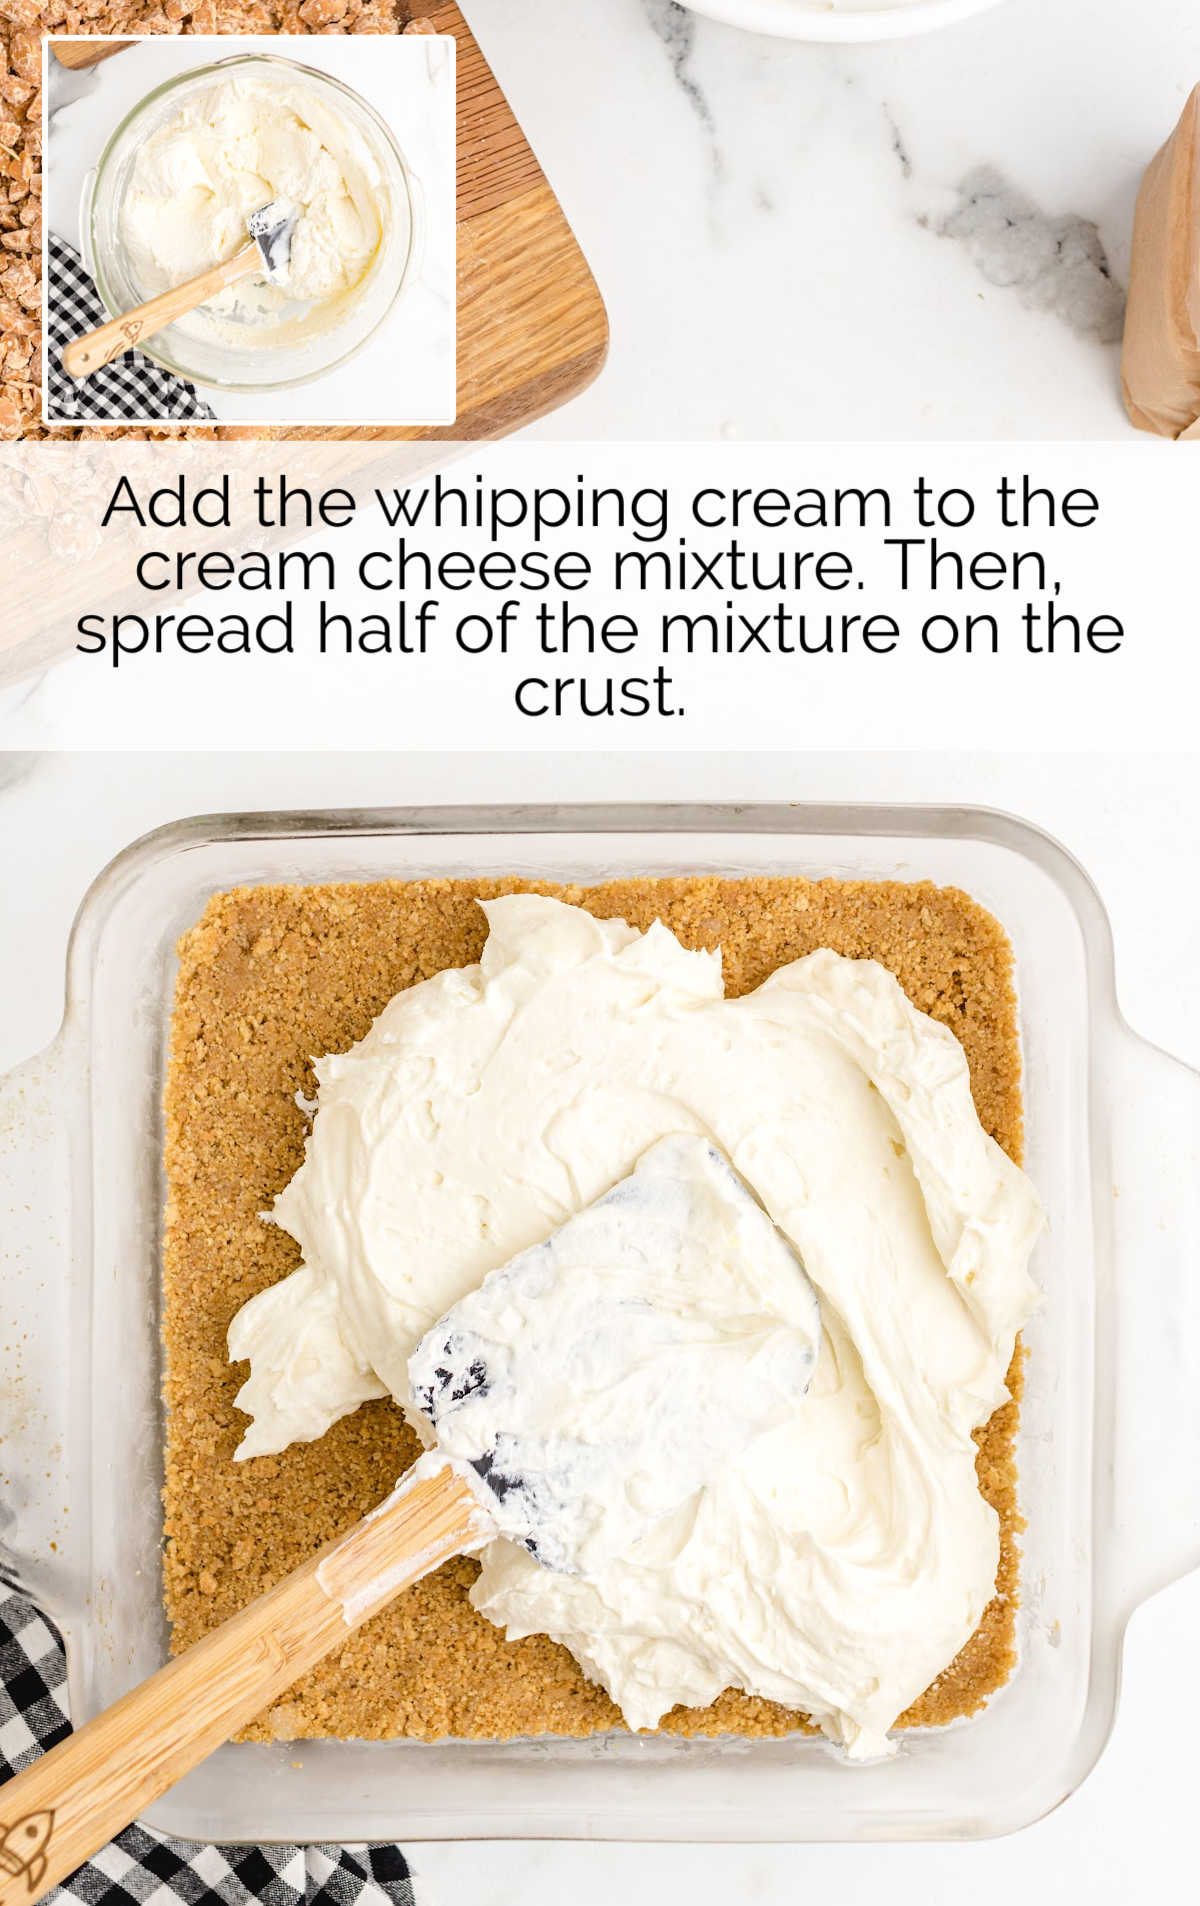 whipping cream added to the cream cheese mixture and spread on top of the crust